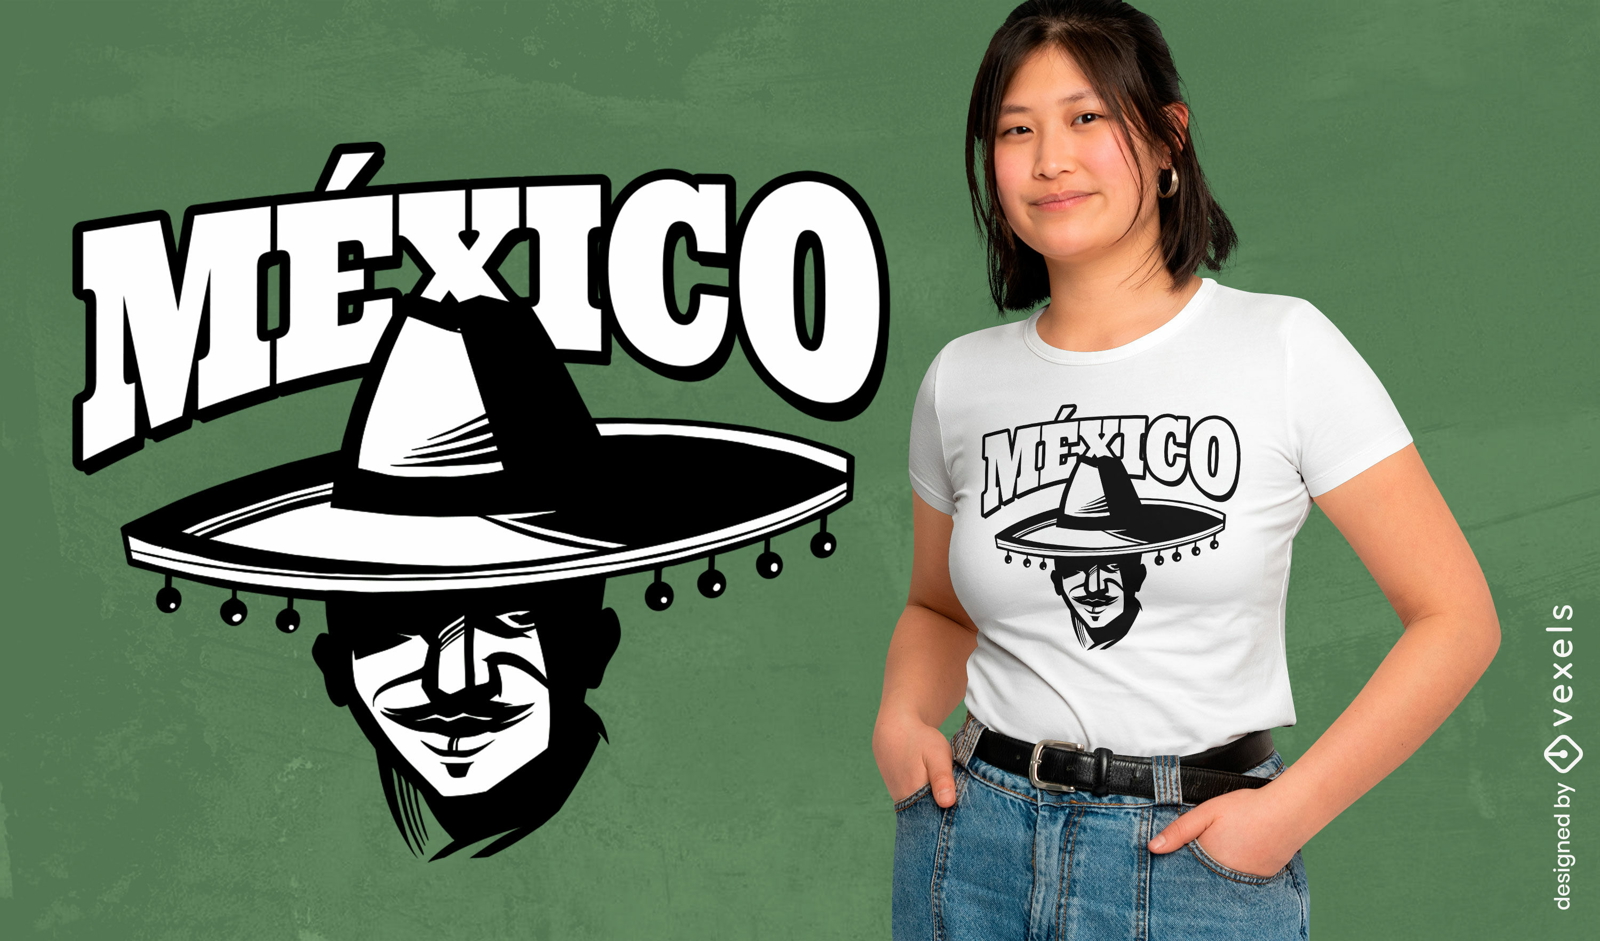 Mexico hat reference t-shirt design